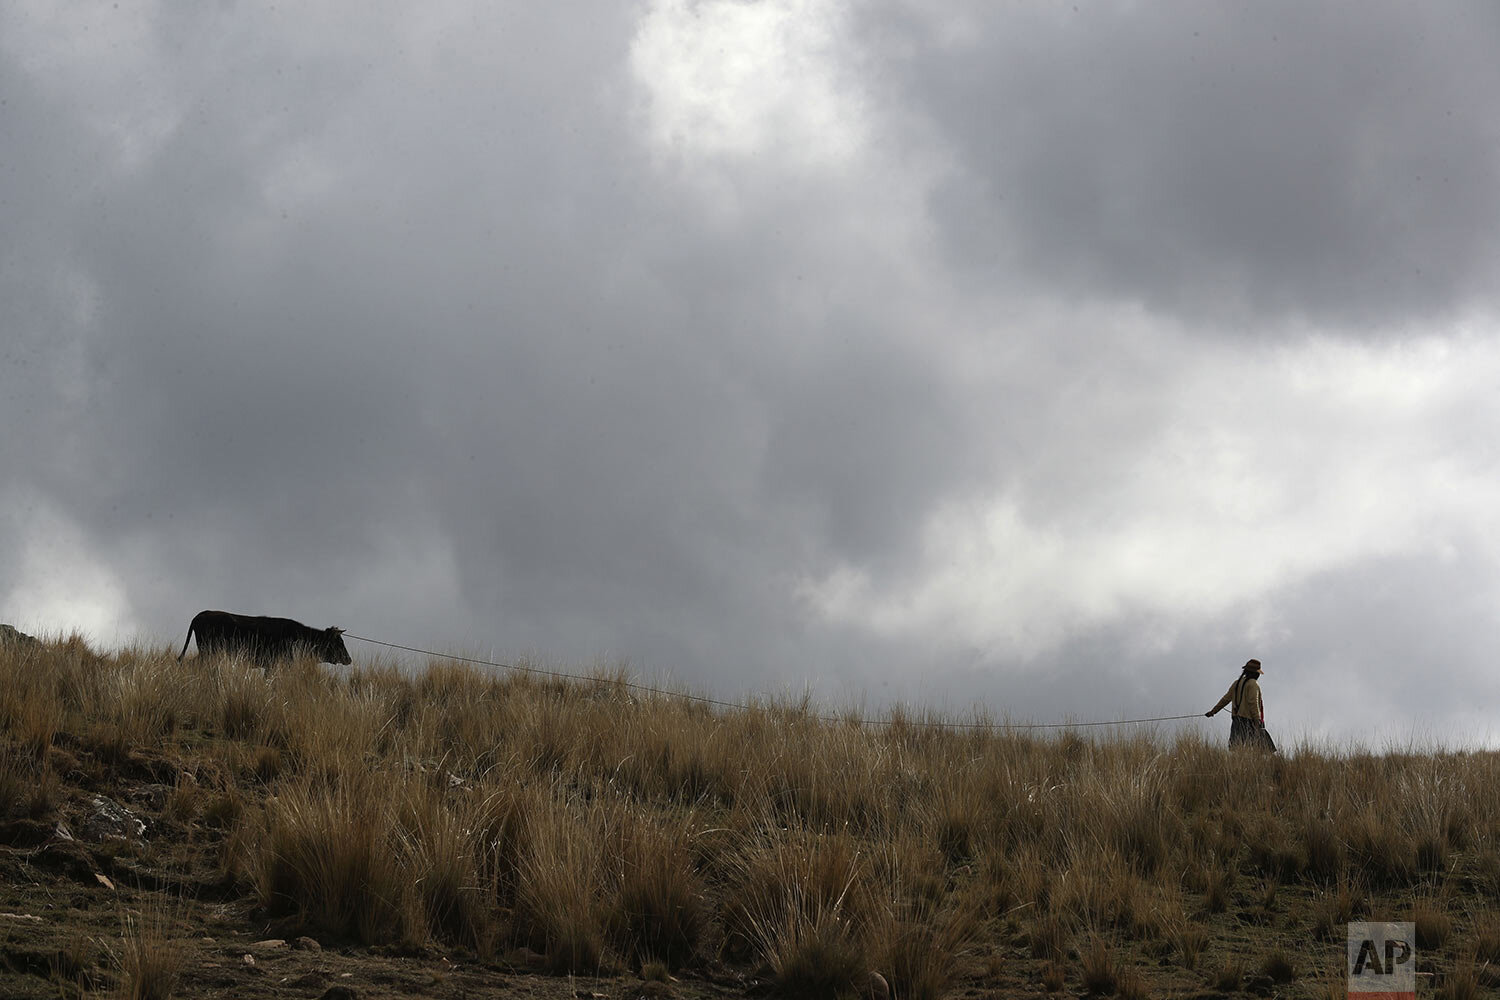  A woman leads her cow through a field in Pisac, southern rural Peru, Friday, Oct. 30, 2020. (AP Photo/Martin Mejia) 